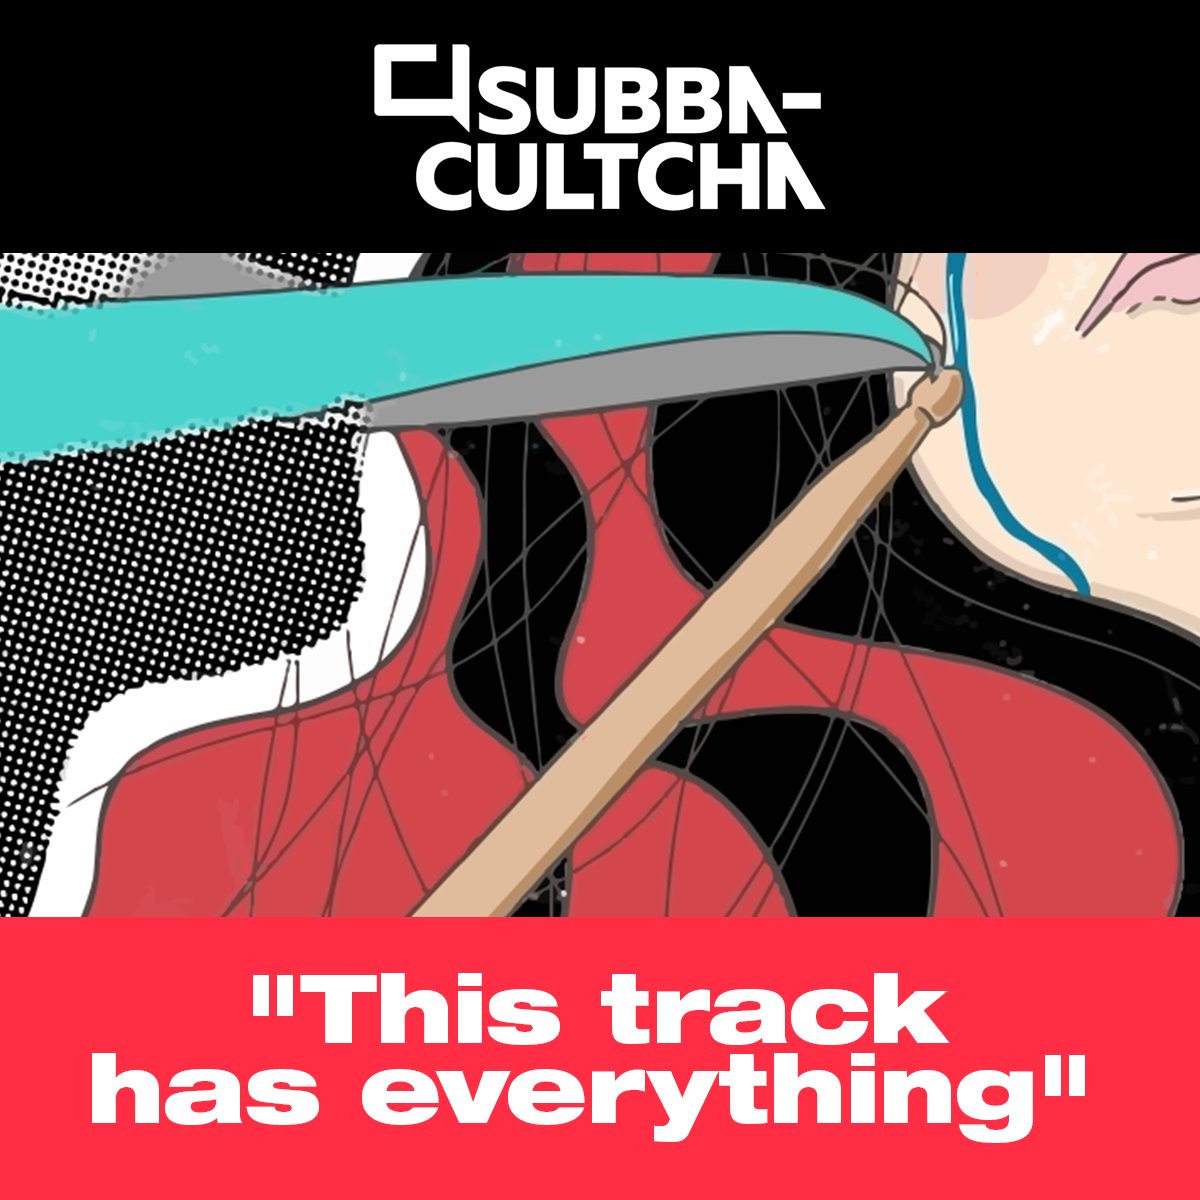 'Possibly the best thing you will hear all year. This track has everything'. Thanks Subba Cultcha for the great review! subba-cultcha.com/reviews/4561 Stream/Merch: linktr.ee/nihilists